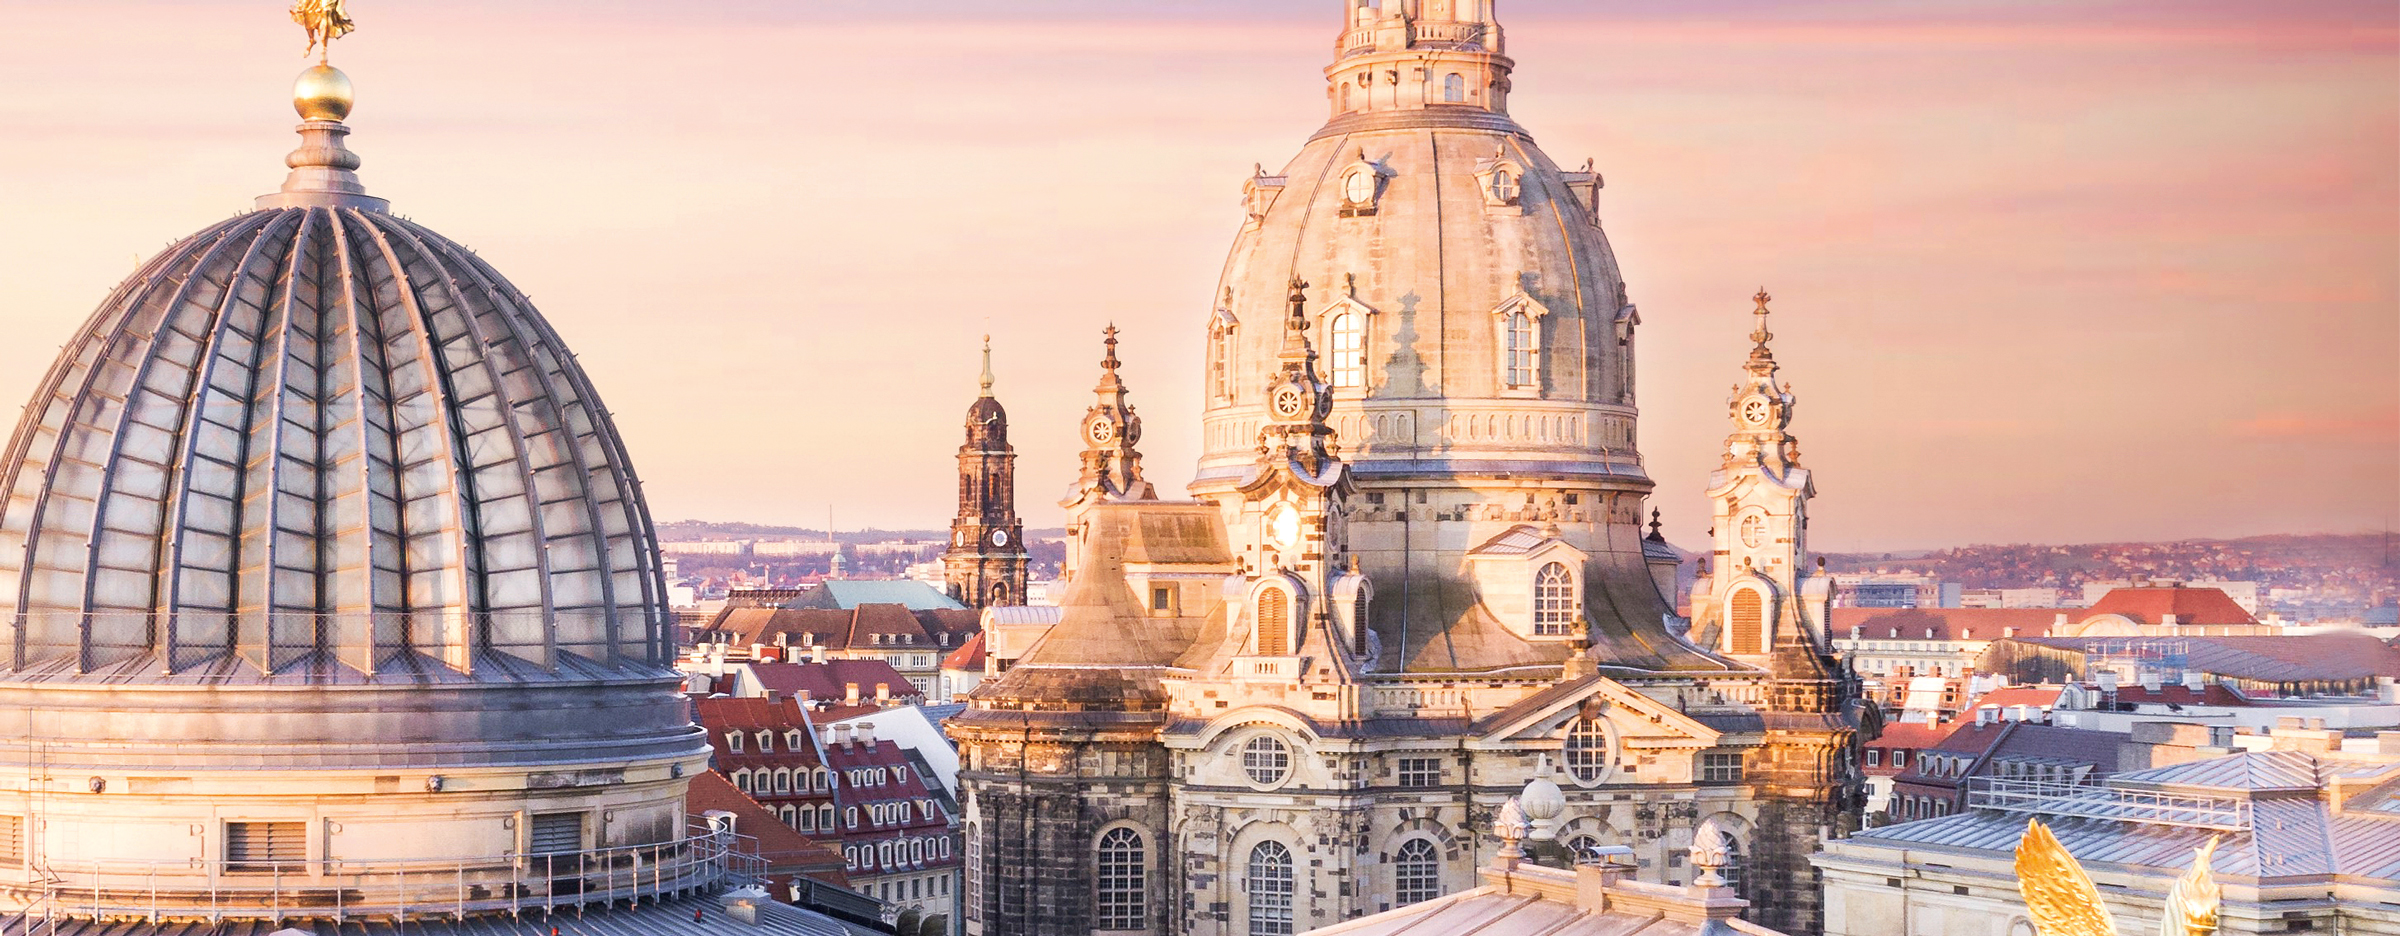 The picture is showing the historic old town of Dresden. By opening youtube you can watch the movie 'Dresden - The hightech location in Europe'.